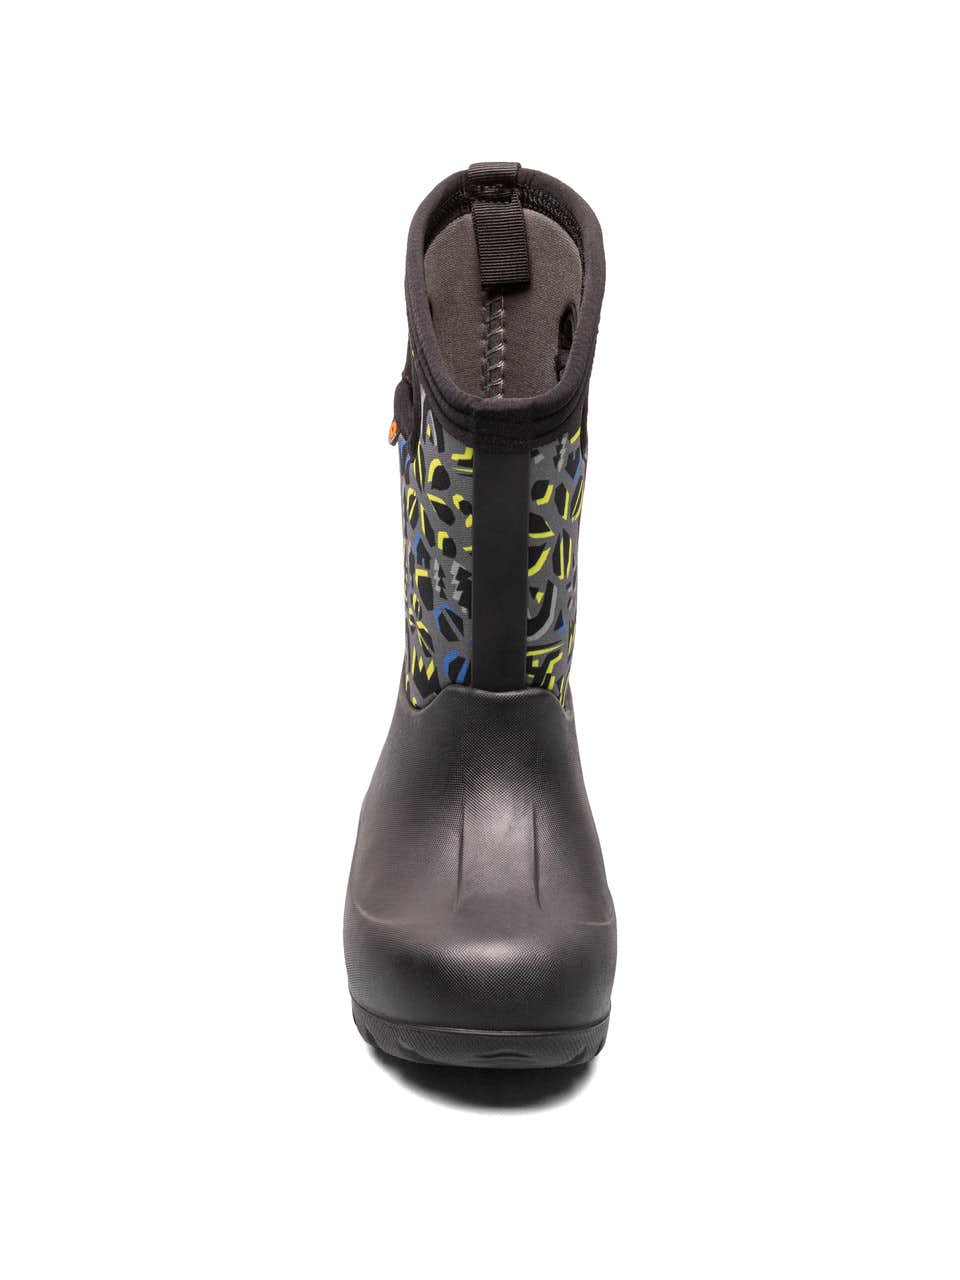 Neo Classic Waterproof Insulated Boots Adventure